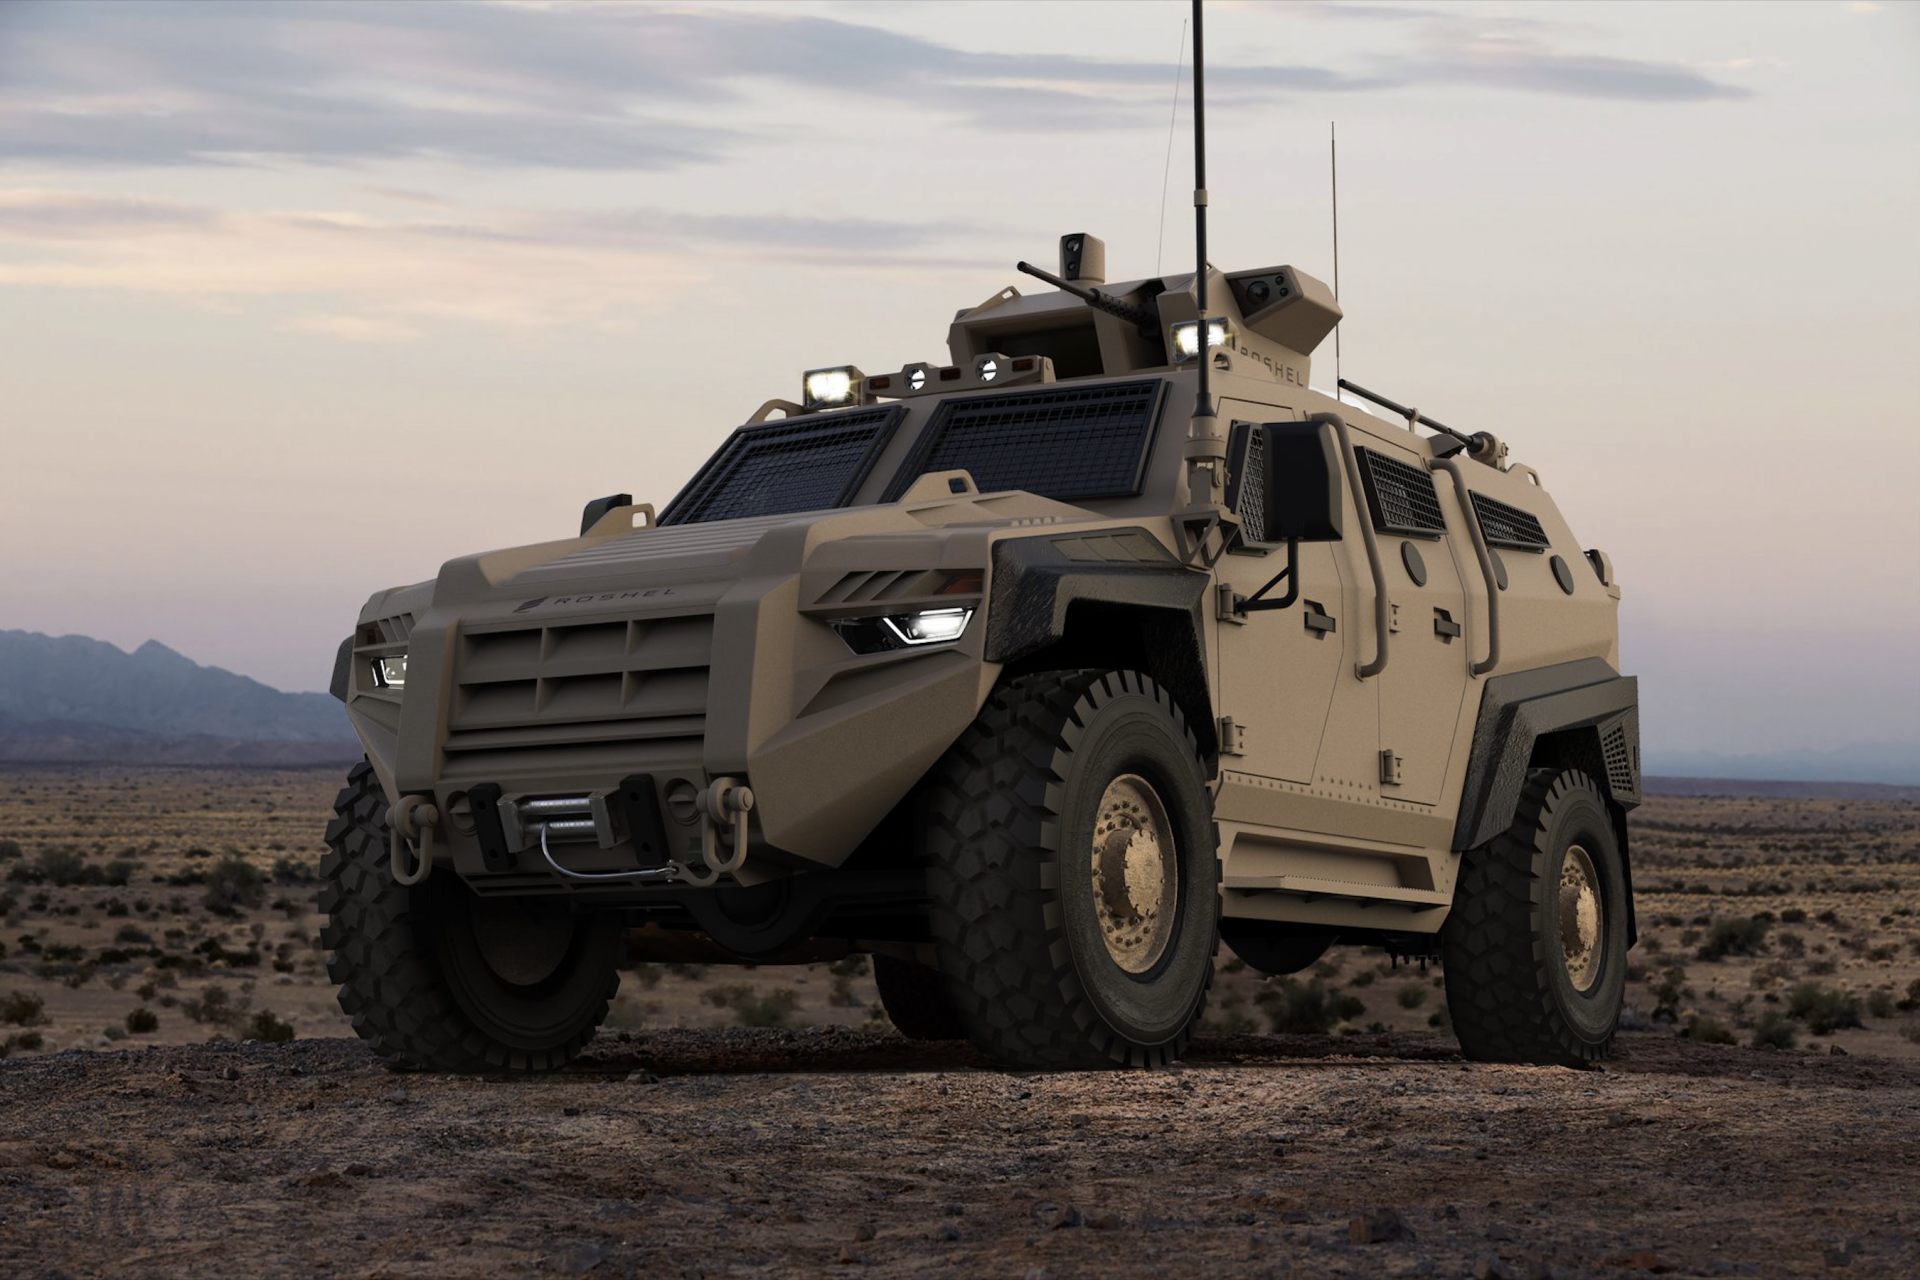 A Canadian armored vehicle manufacturer is bringing production to Ukraine